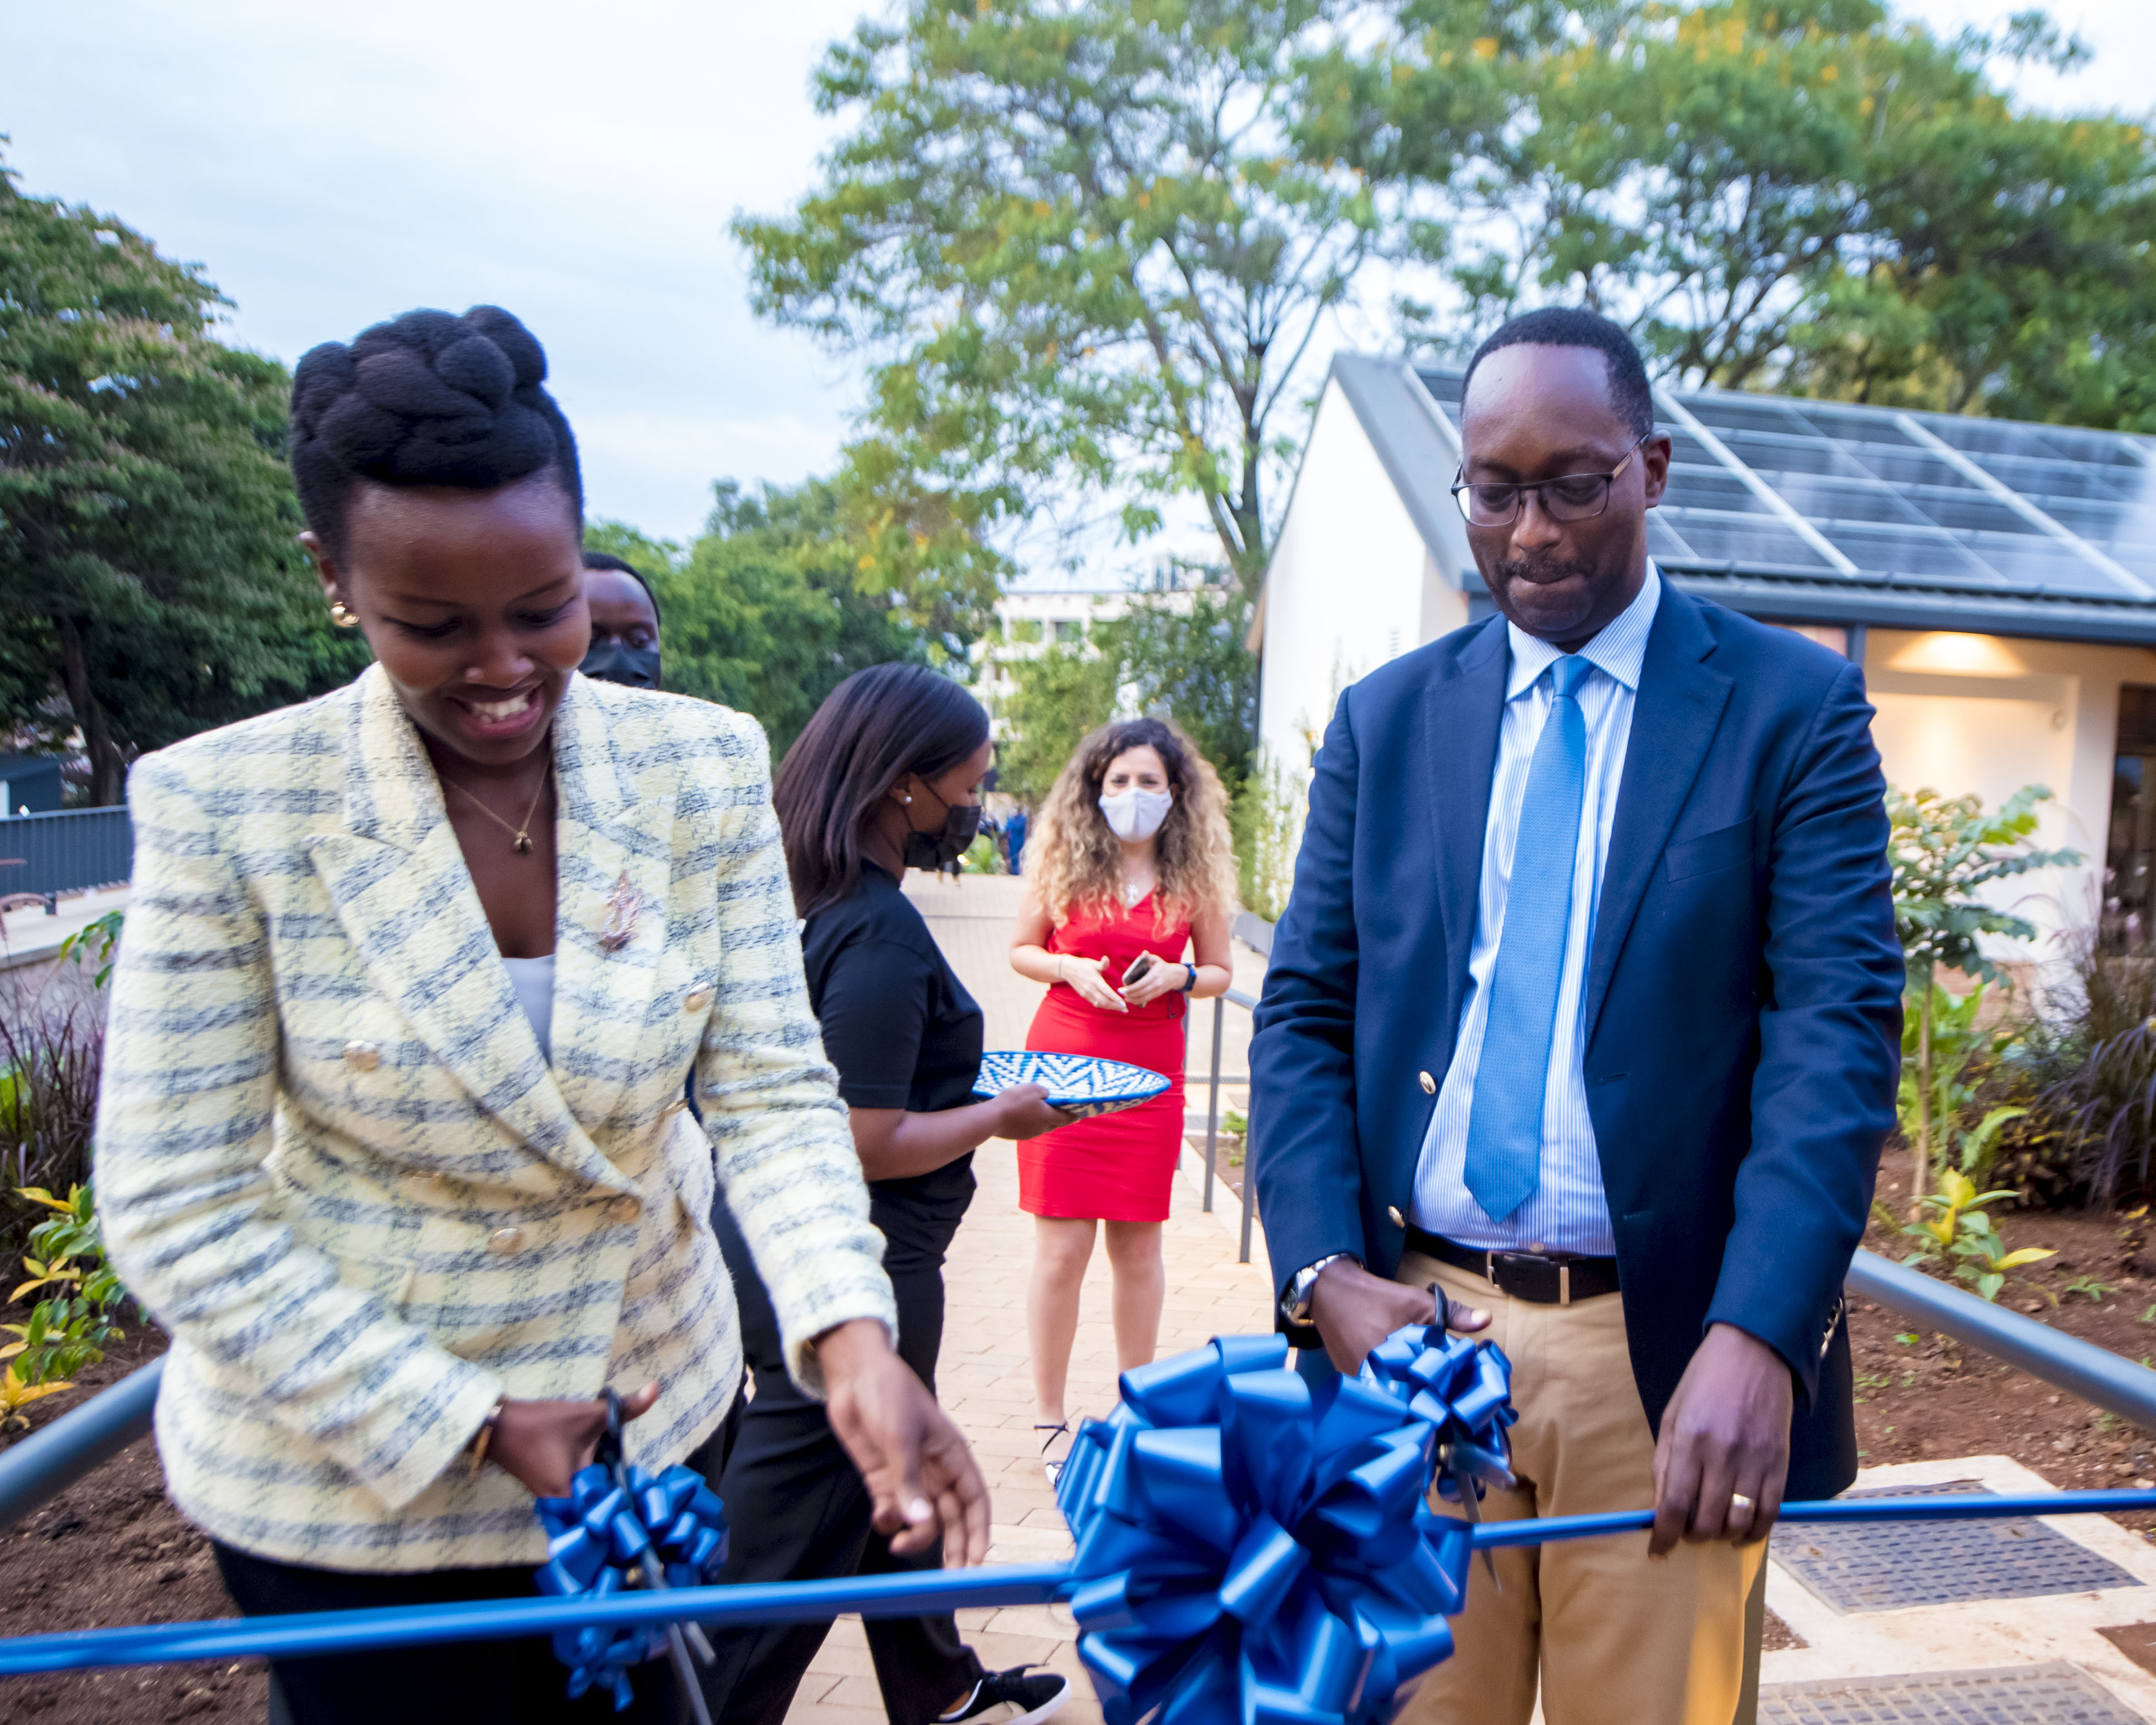 Paula Ingabire (L), the Minister of ICT and Dr. Daniel Ngamije, the Minister of Health cut the ribbon to luanch the healthtech hub in Kigali.